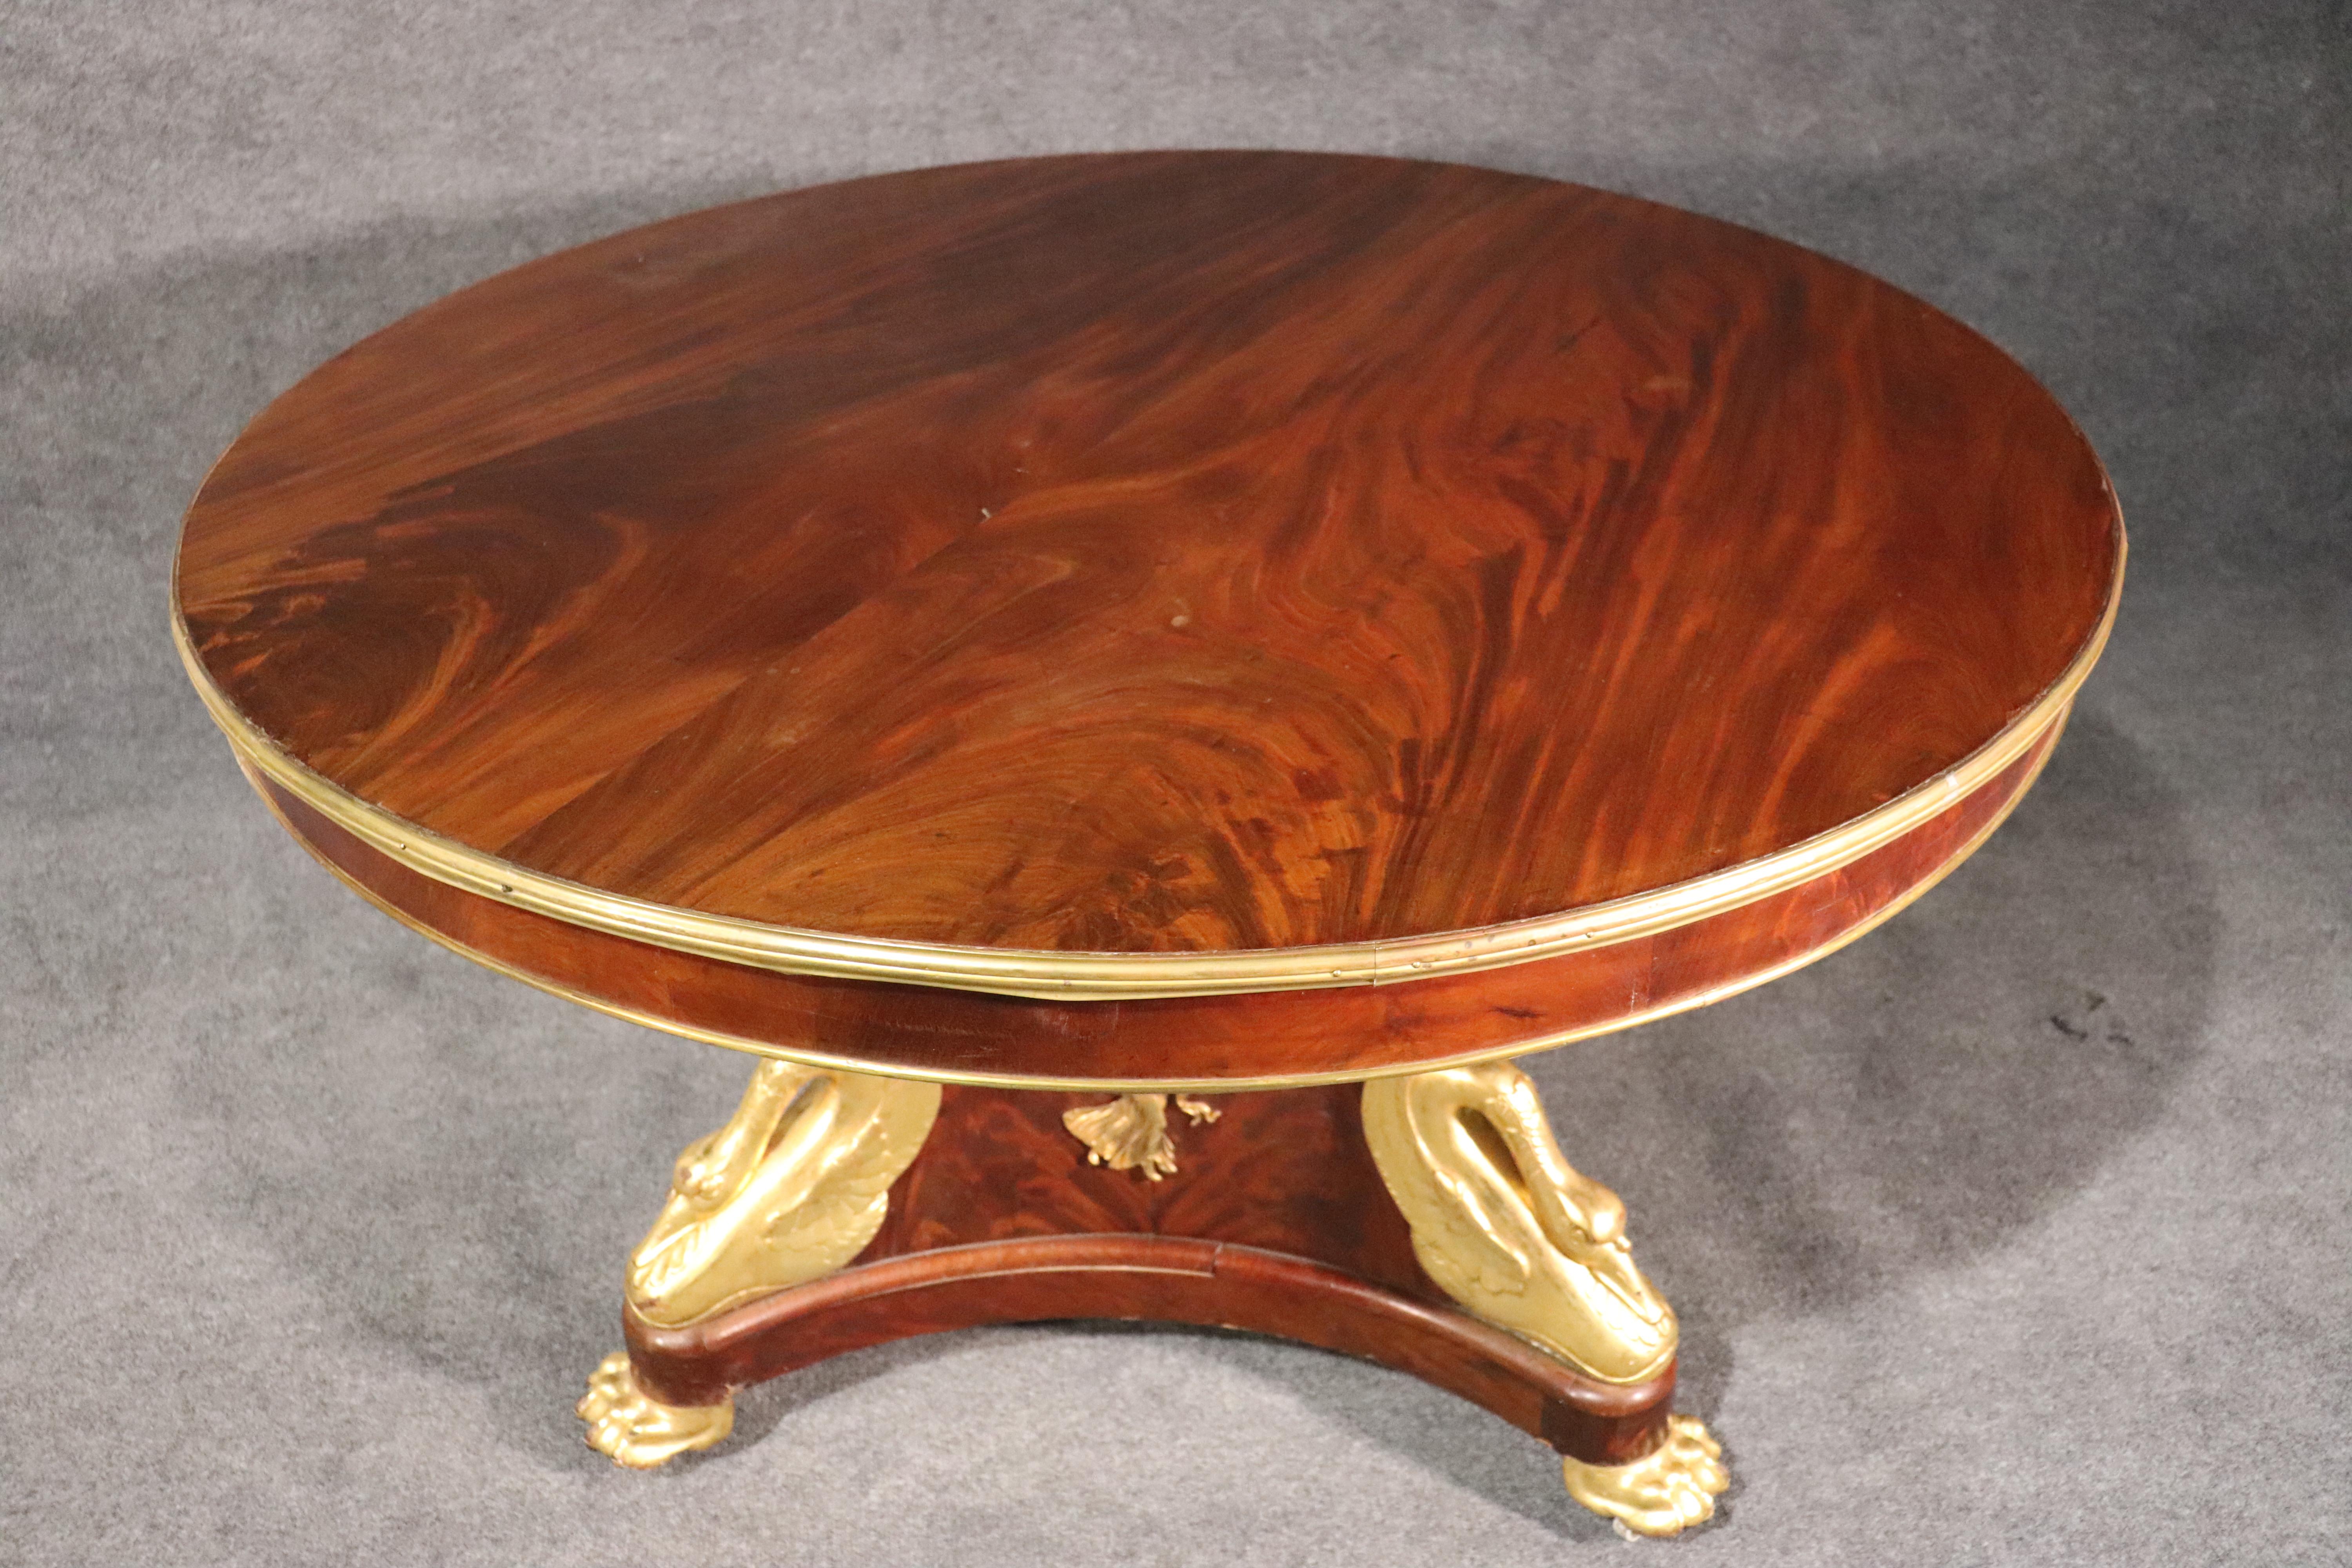 This is a rare solid mahogany carved center table with a large round top with polished bronze trim at the top and a bronze angel at the base. The table features water-gilded swans, which is the brightest and most metallic form of gold leafing. The